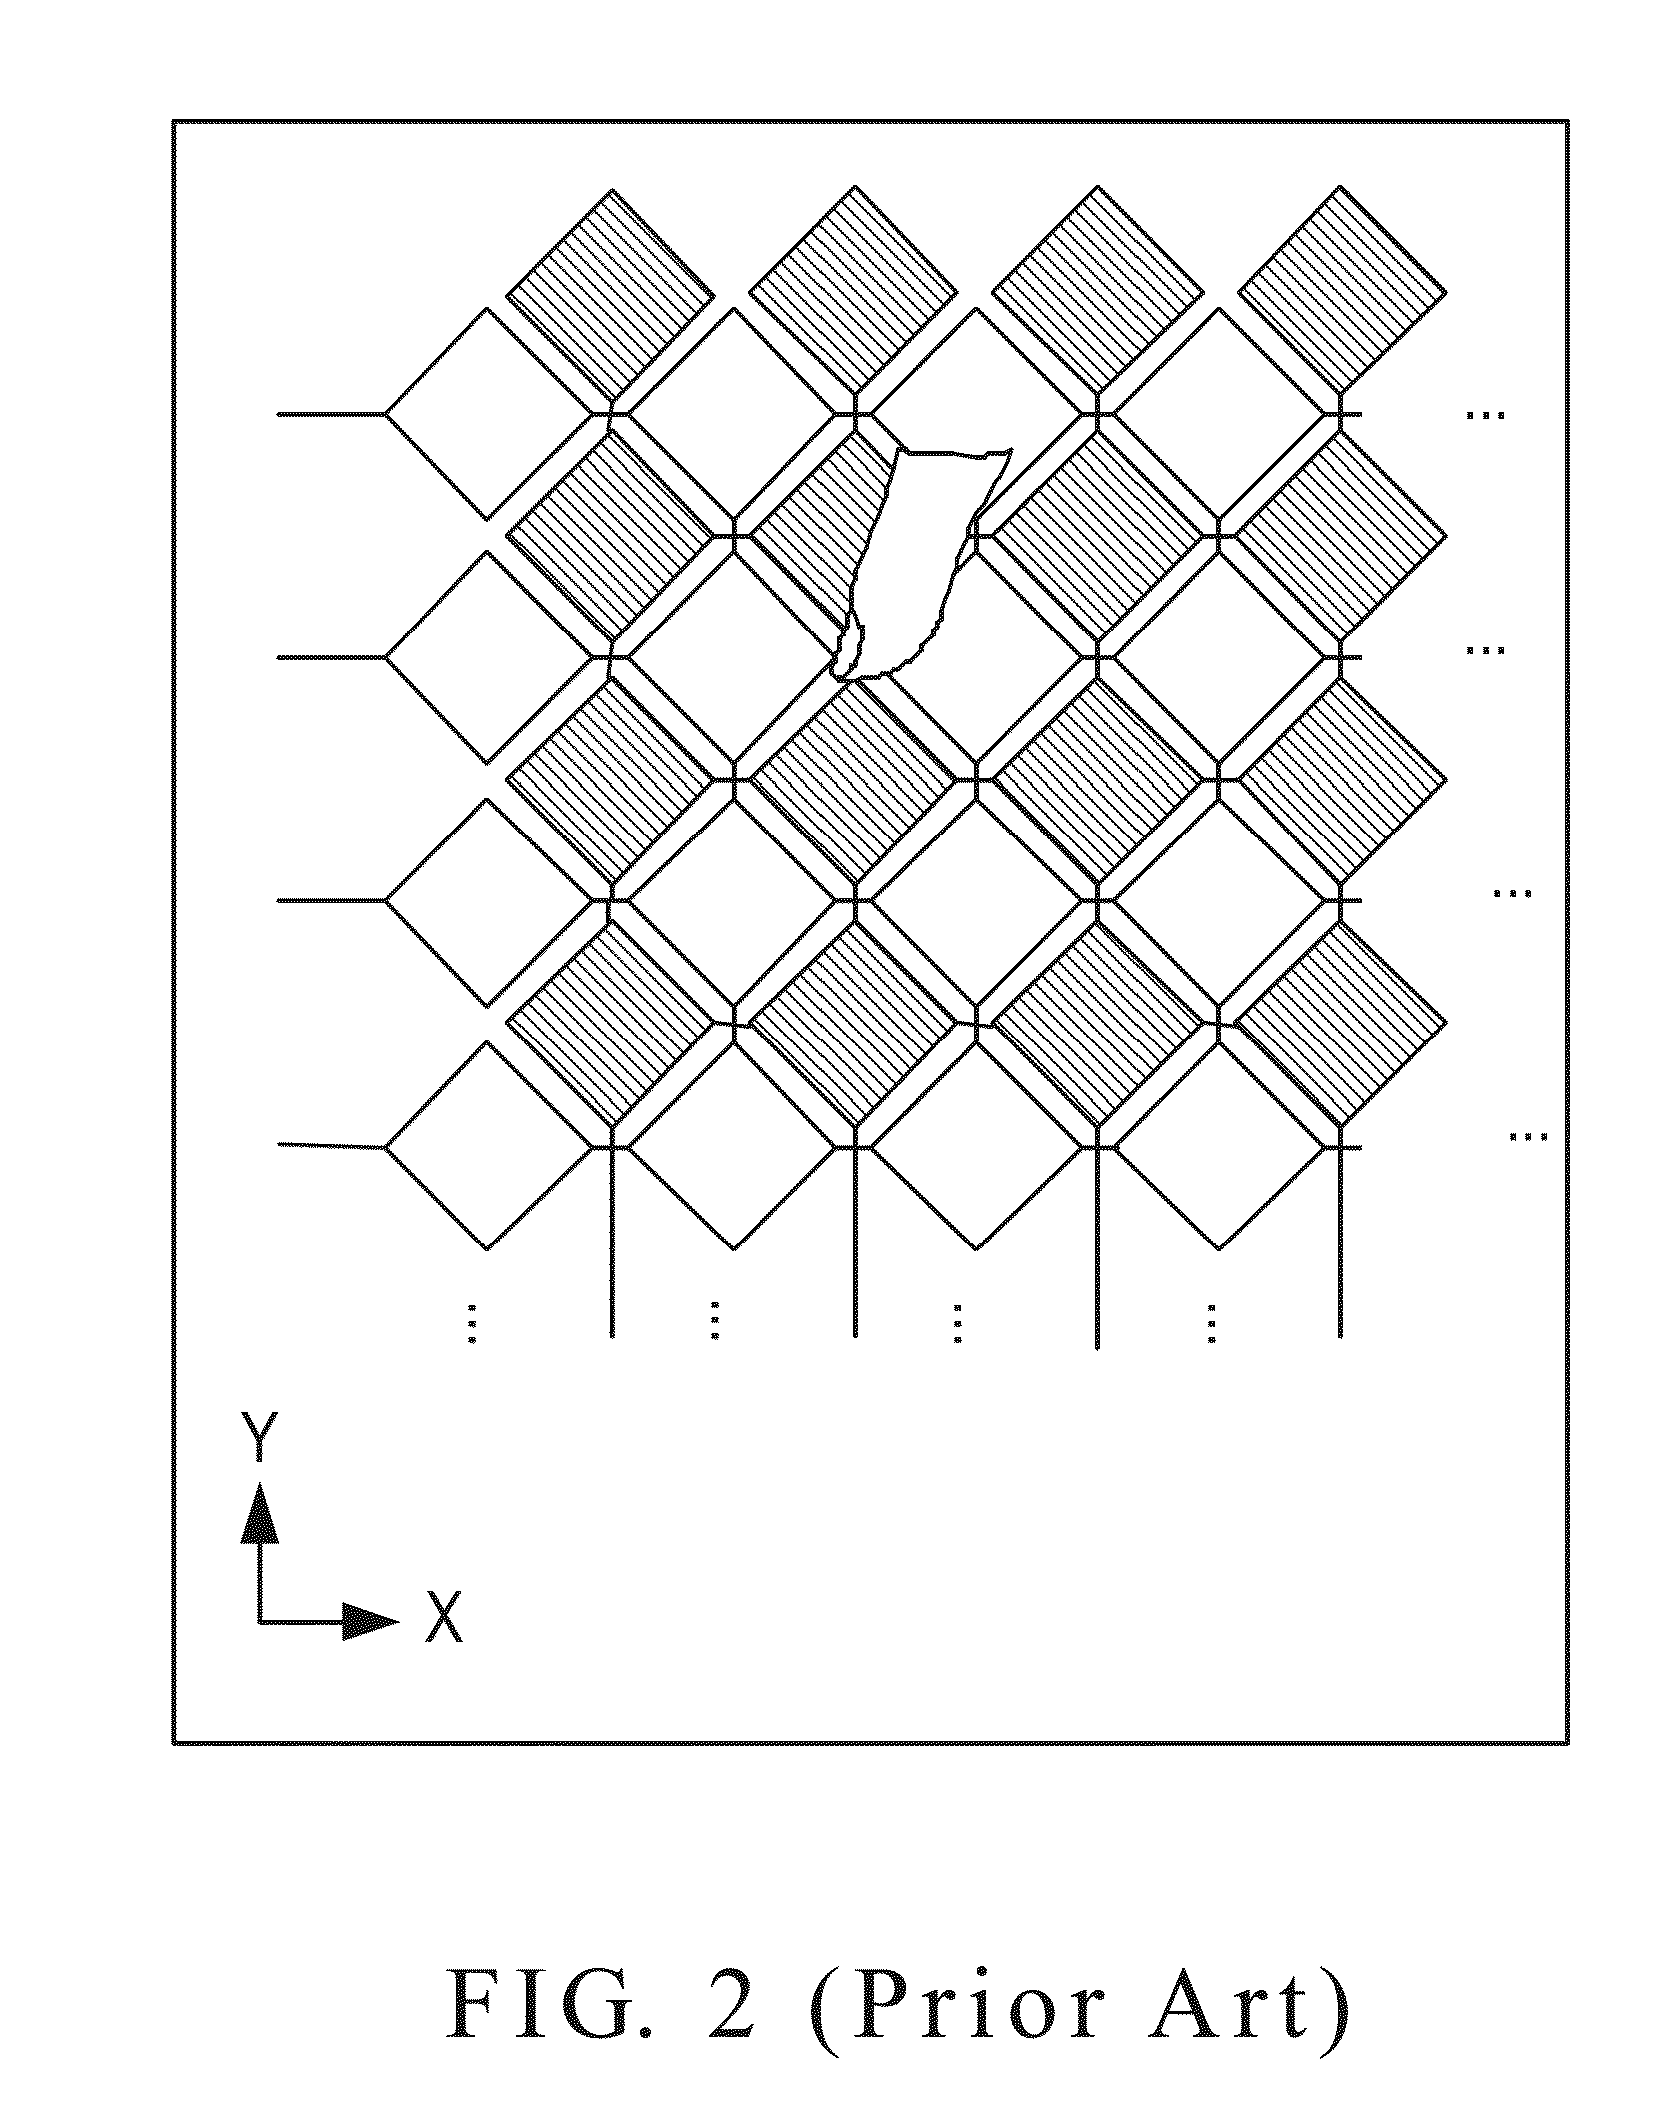 High-accuracy flat touch display panel structure